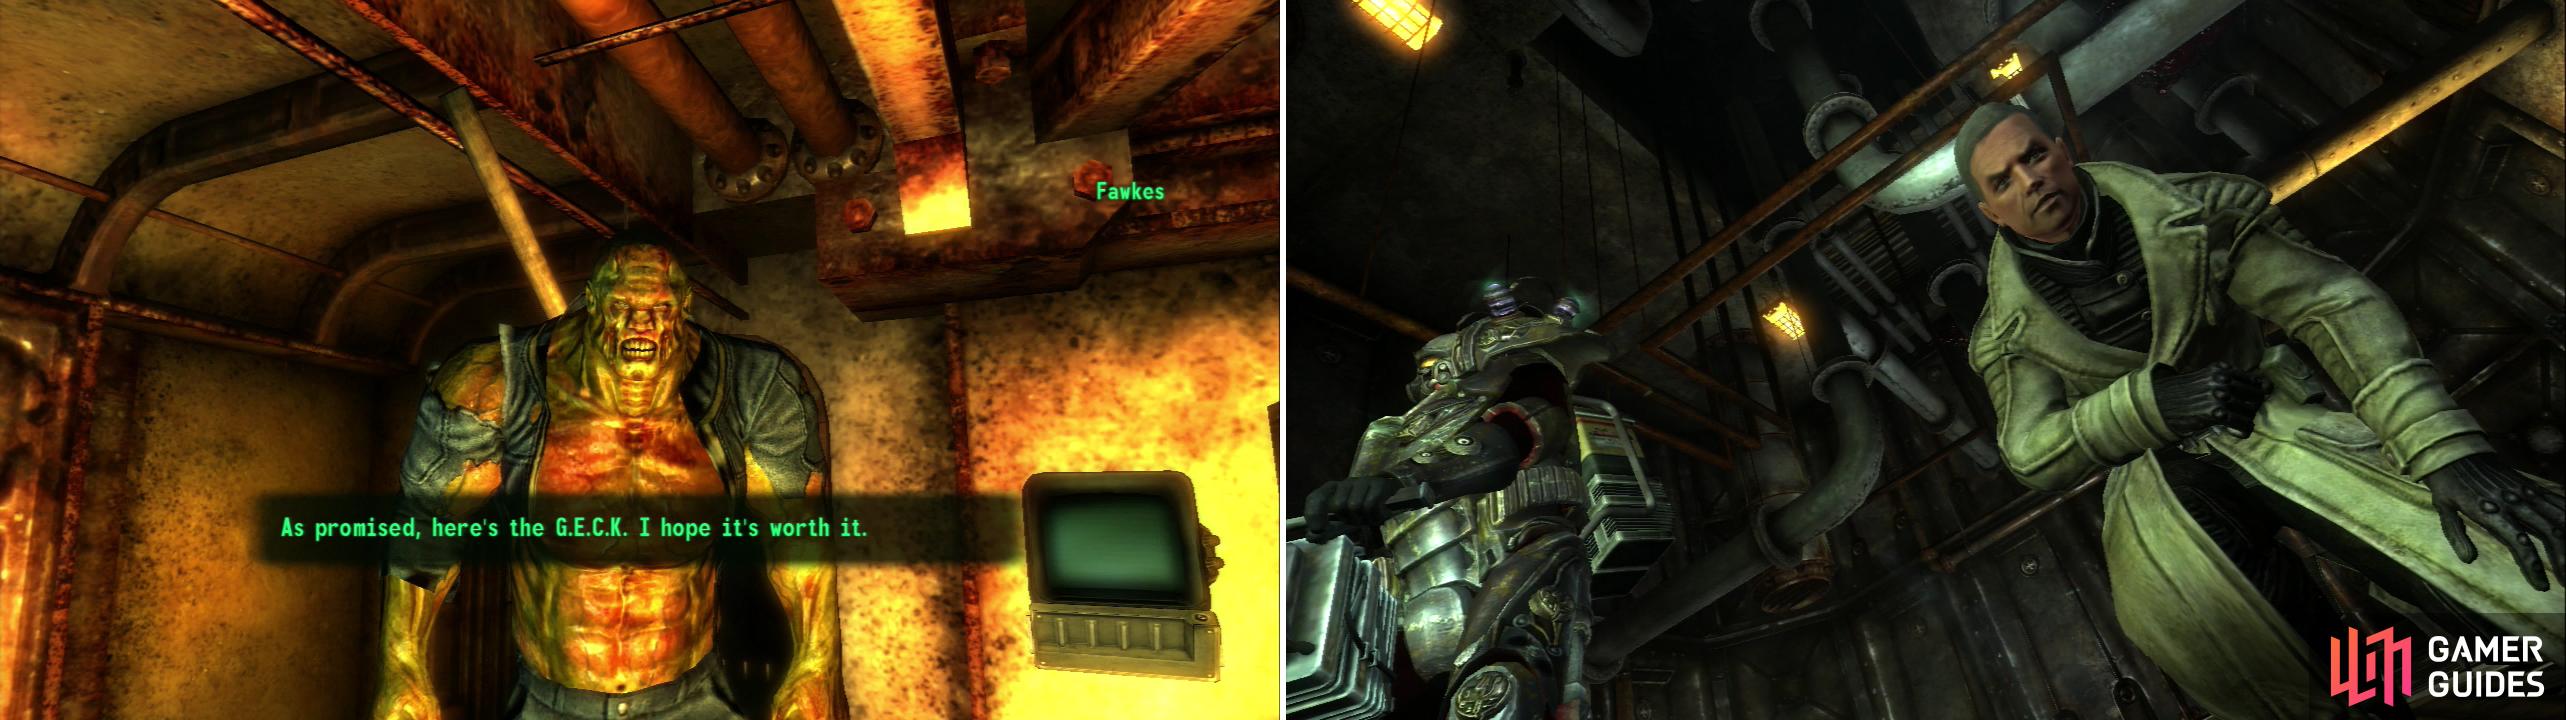 If you free Fawkes, you can send the Super Mutant to recover the G.E.C.K. for you (left). Unfortunately, the Enclave was waiting for you to do all the dirty work so they can claim the G.E.C.K. (right).